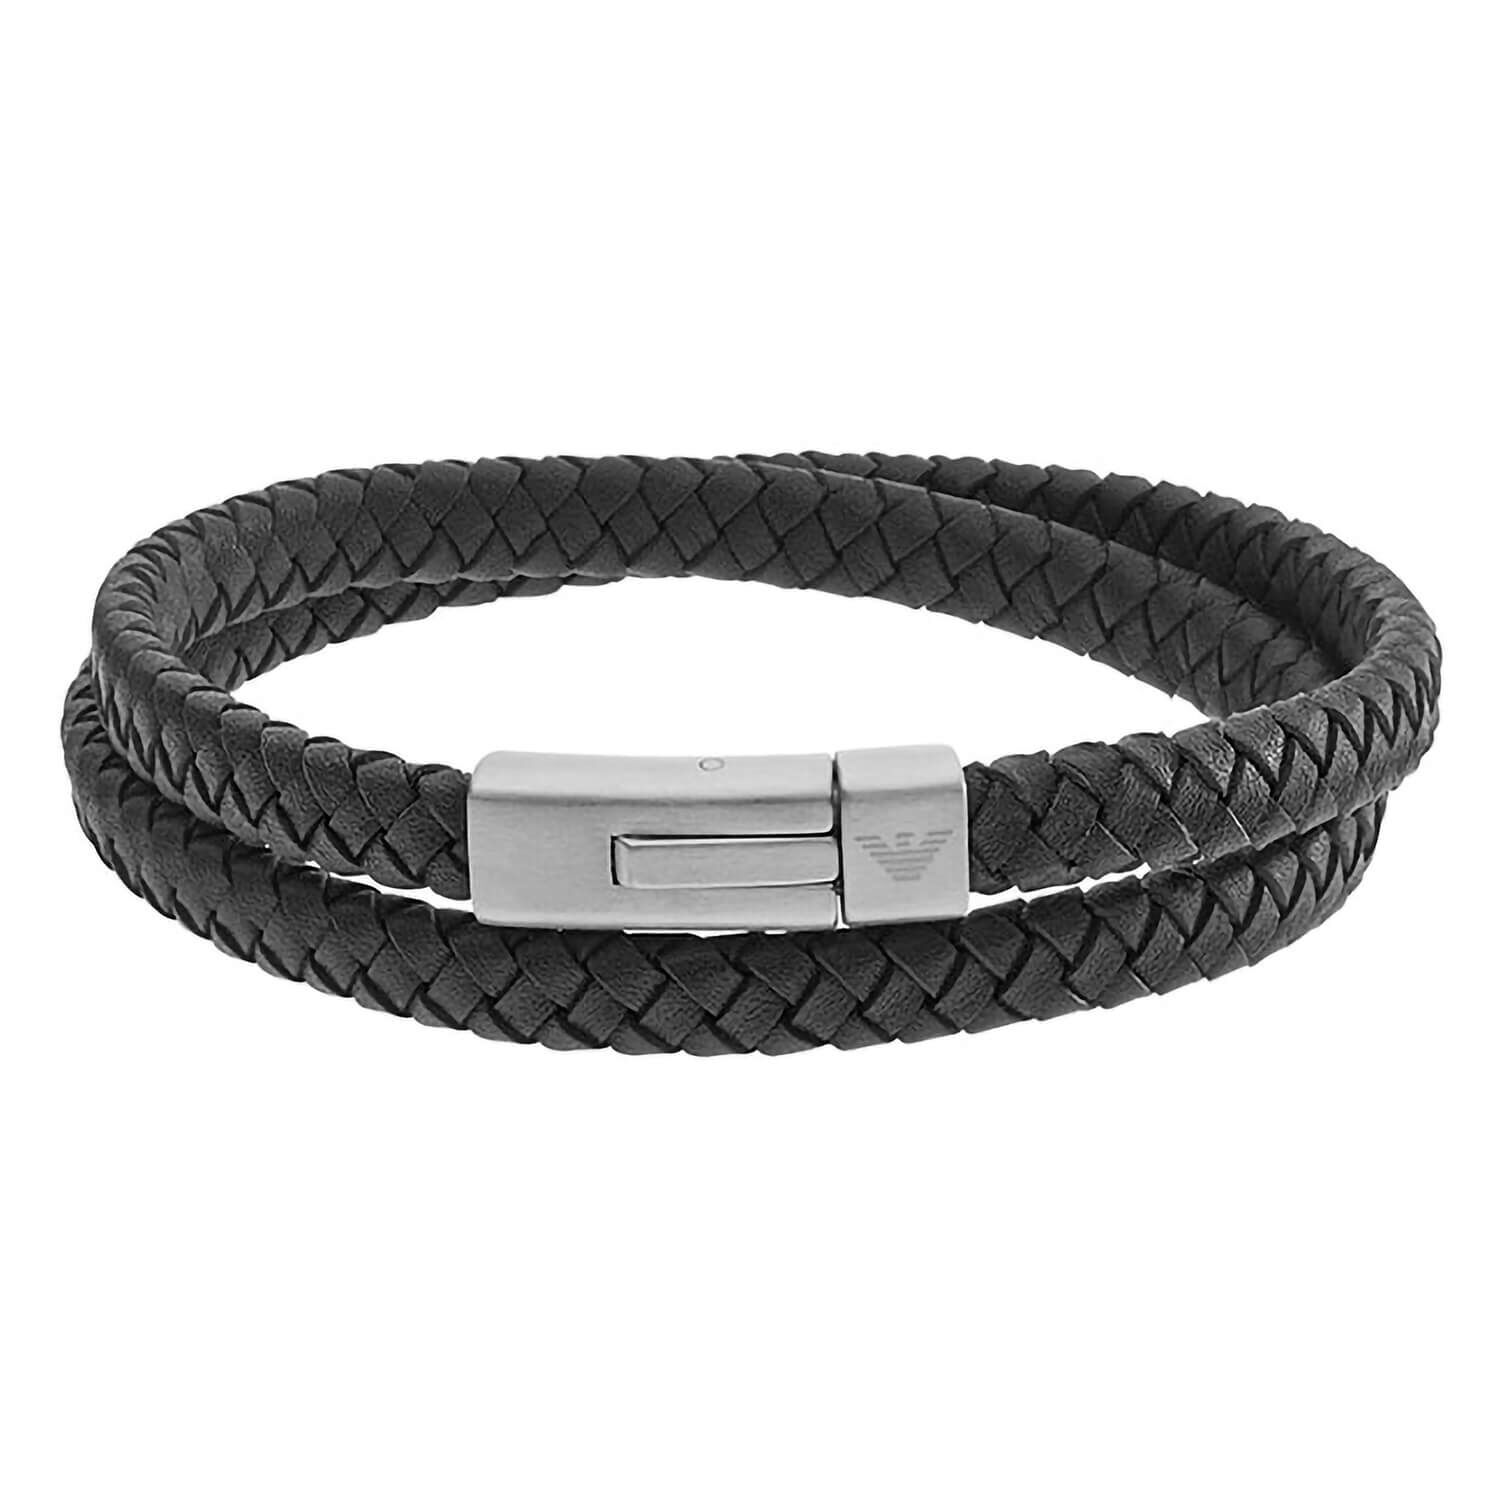 Aggregate more than 79 emporio armani woven leather bracelet best - in ...